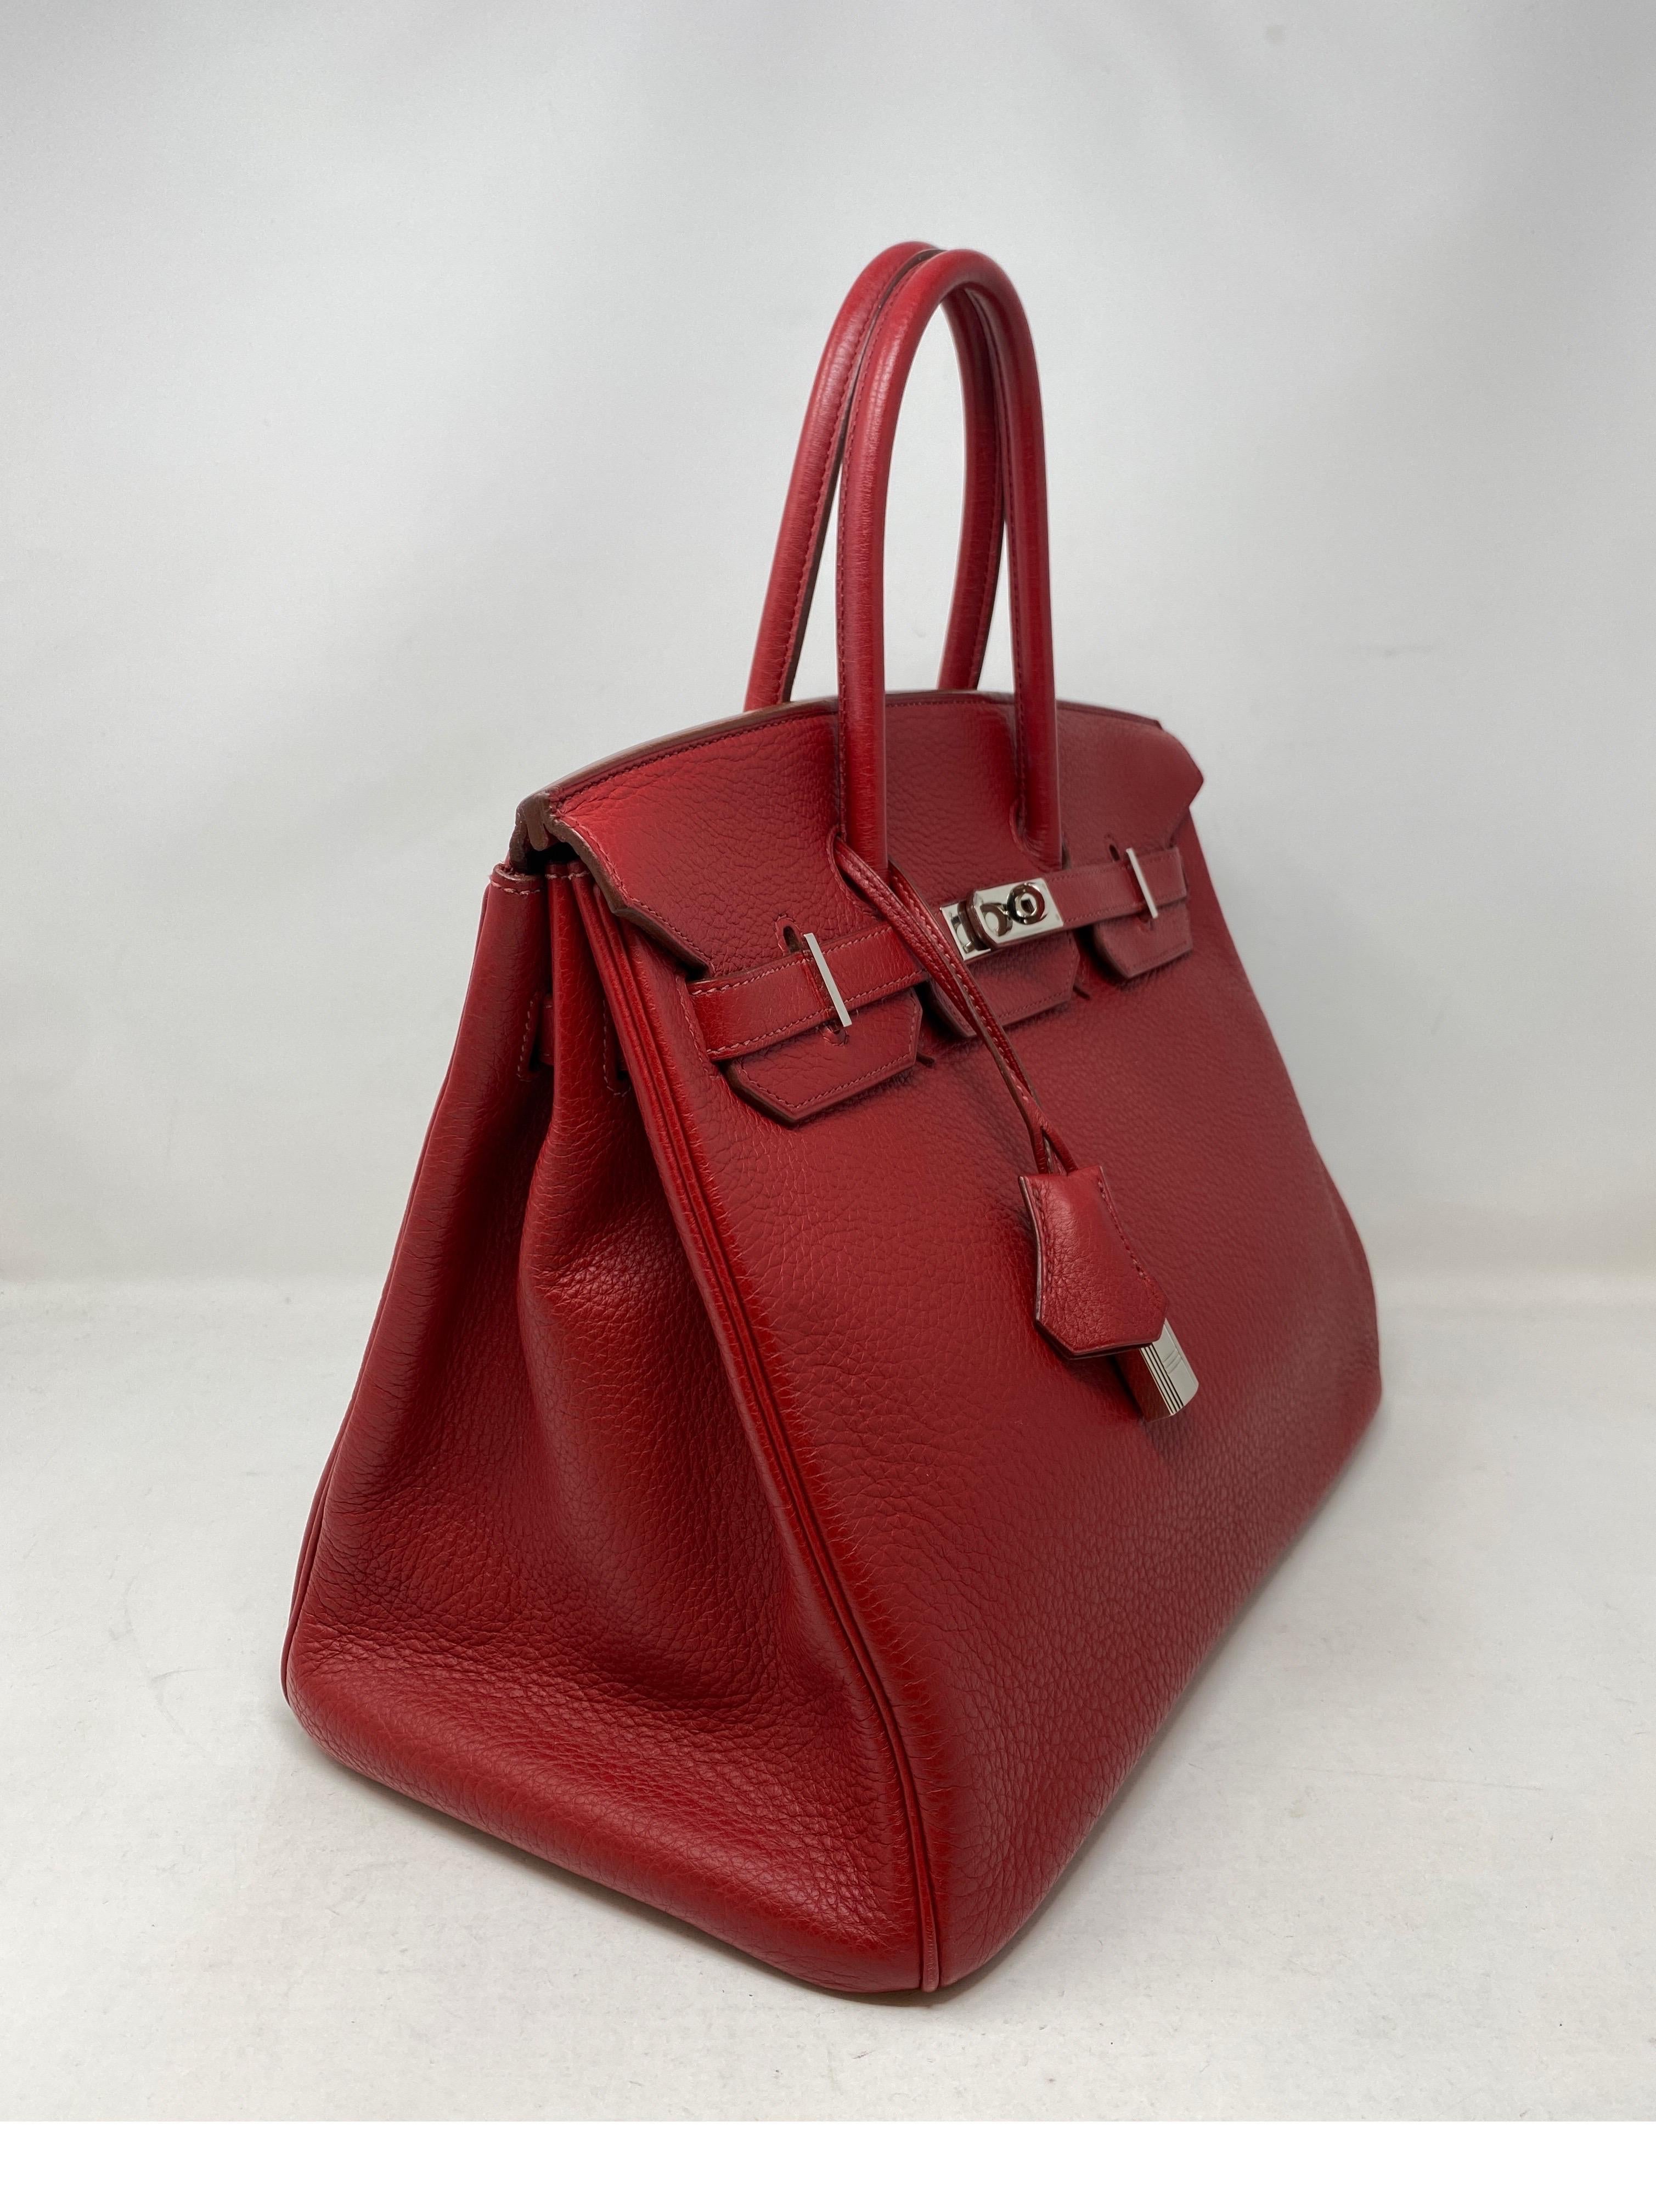 Hermes Rouge Garance Birkin 35 Bag. Beautiful red color with palladium hardware. Excellent condition. Great investment bag. Includes clochette, lock, keys, and dust cover. Guaranteed authentic. 